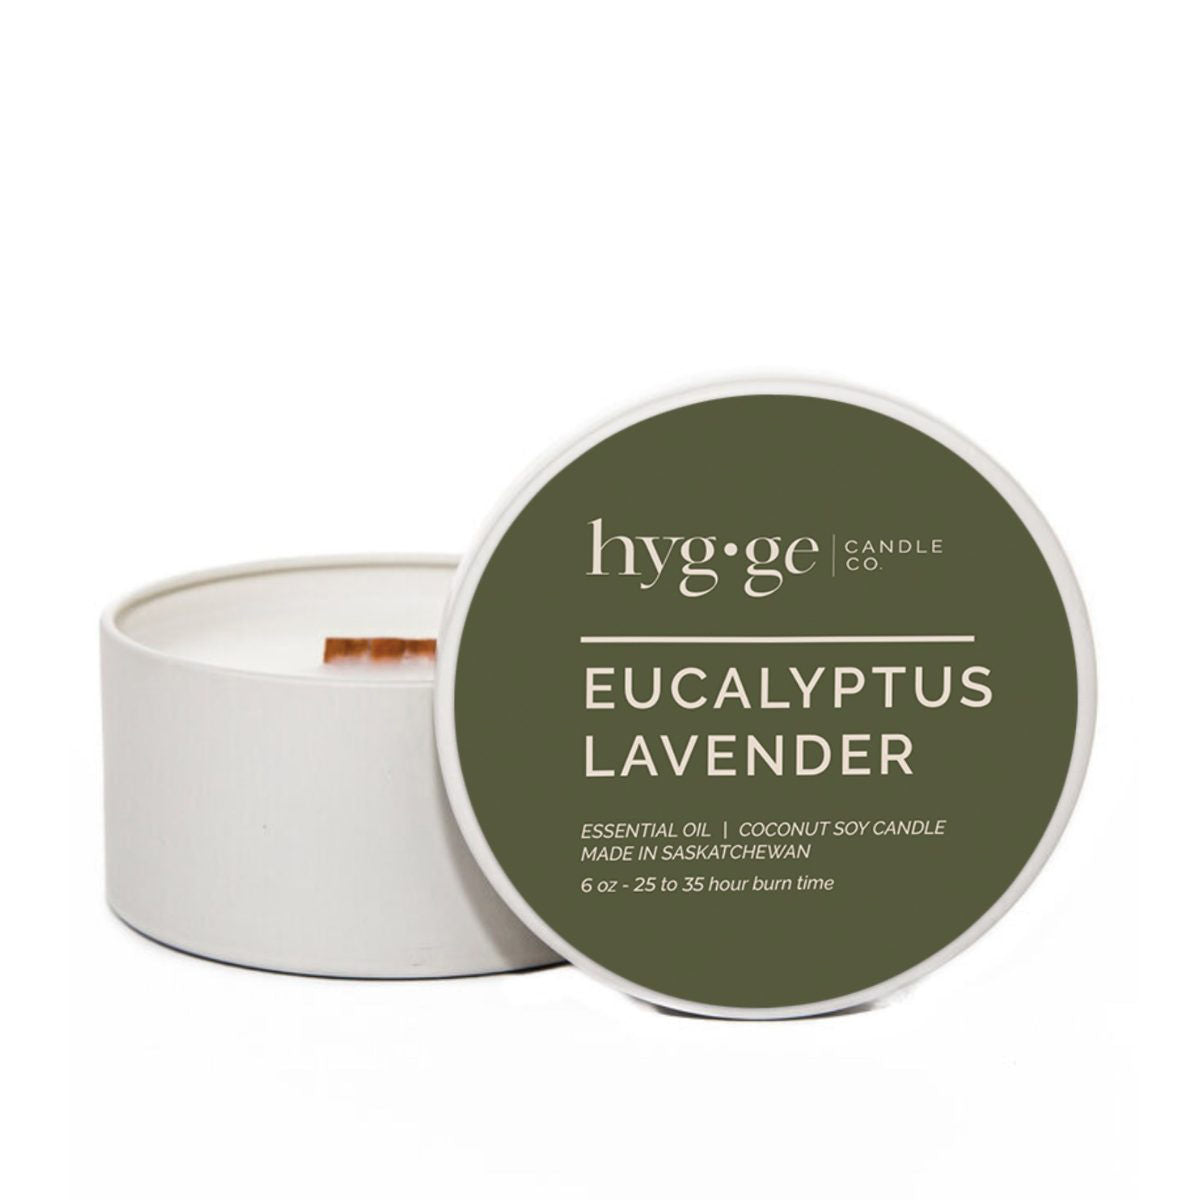 Hygge Candle in Eucalyptus Lavender - 6oz